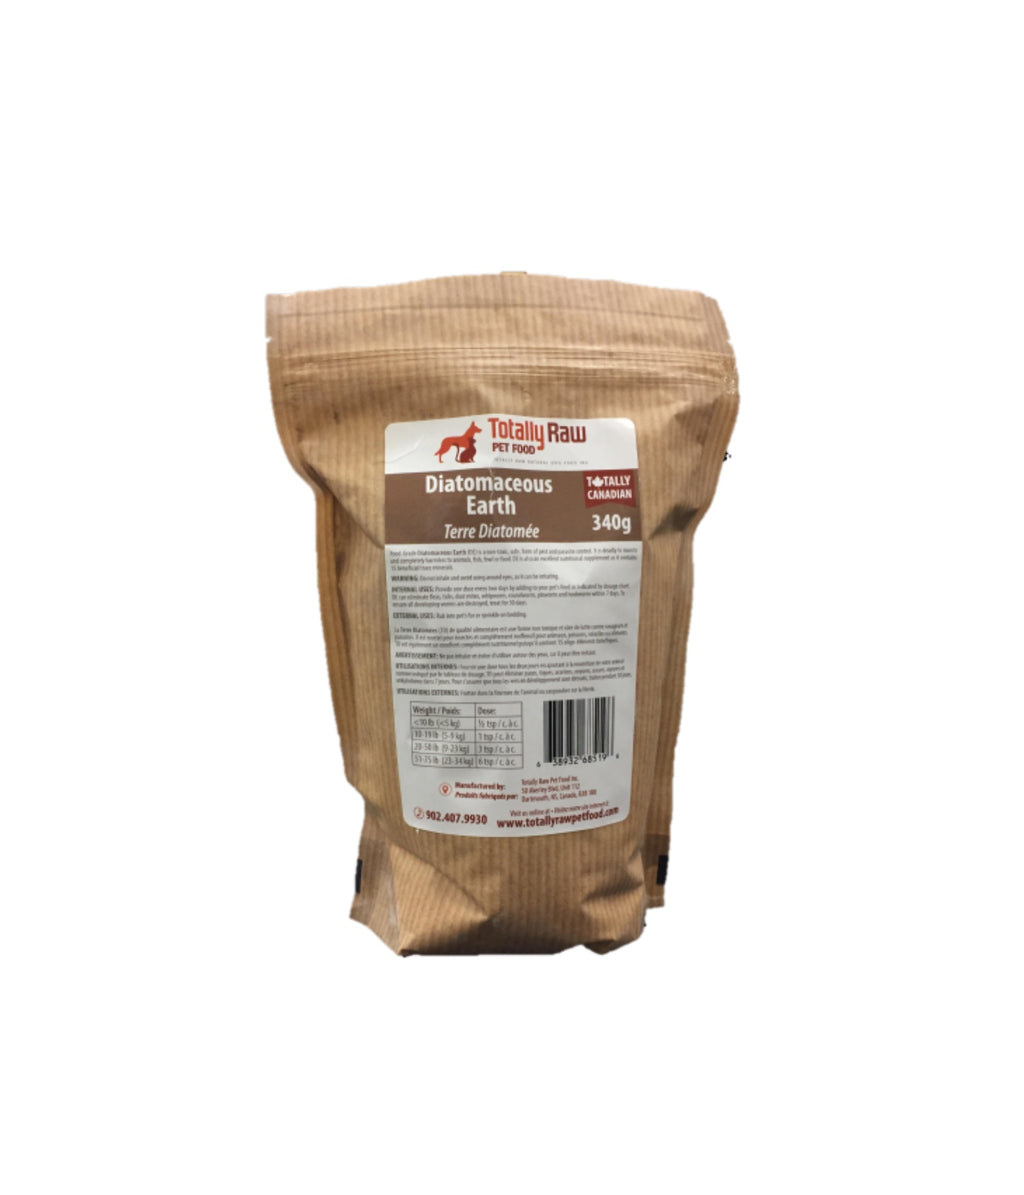 Totally Raw - Diatomaceous Earth - 340g